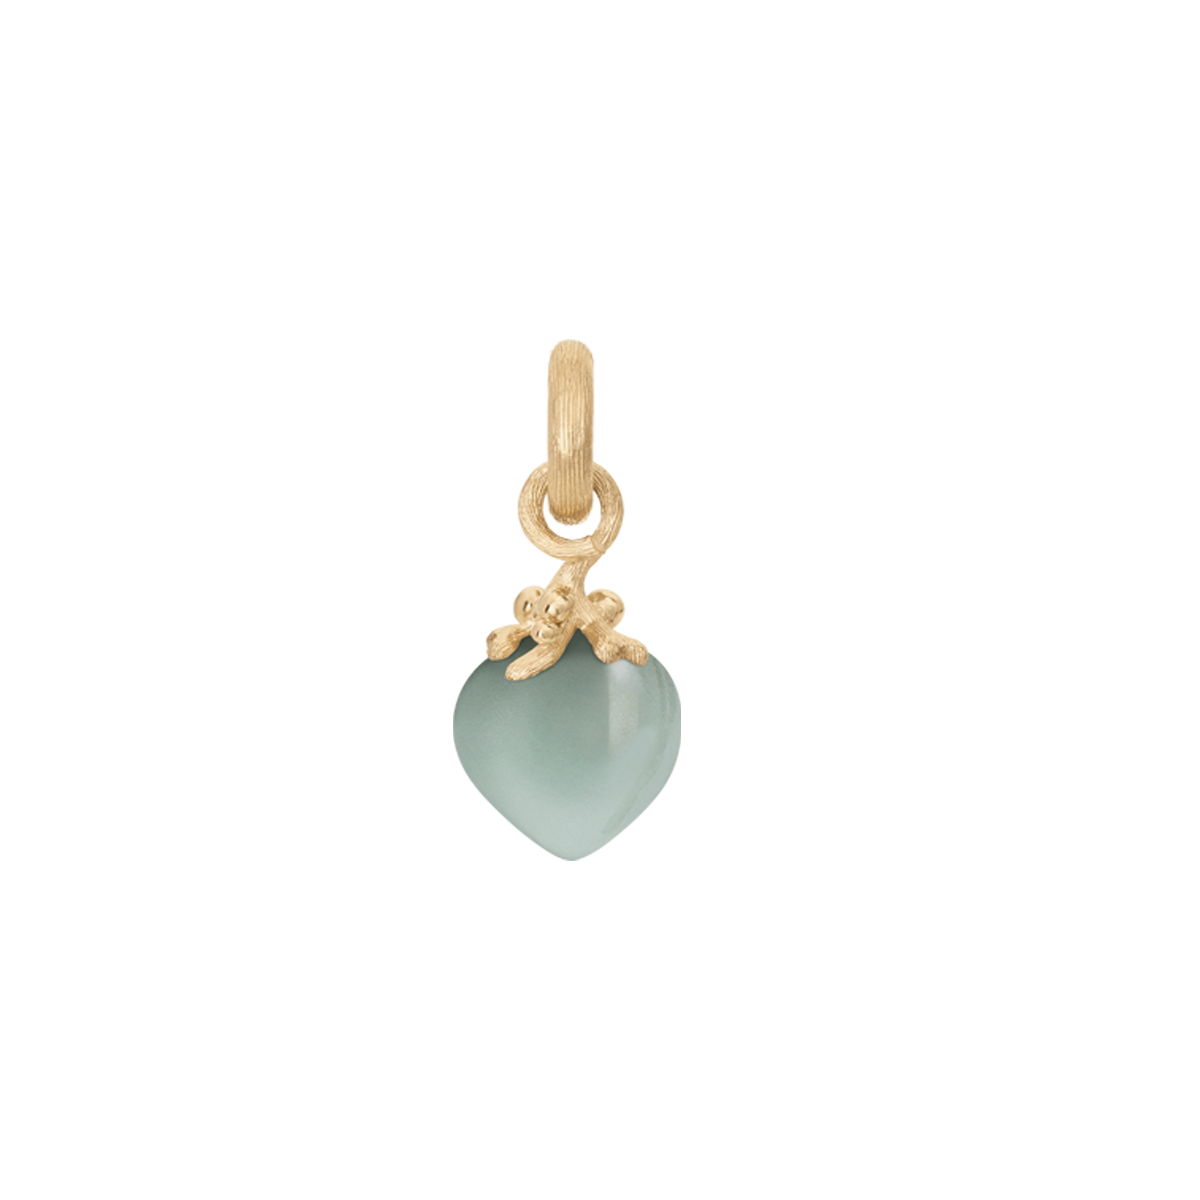 Sweet Drops Charm in 18K Yellow Gold with Aquamarine